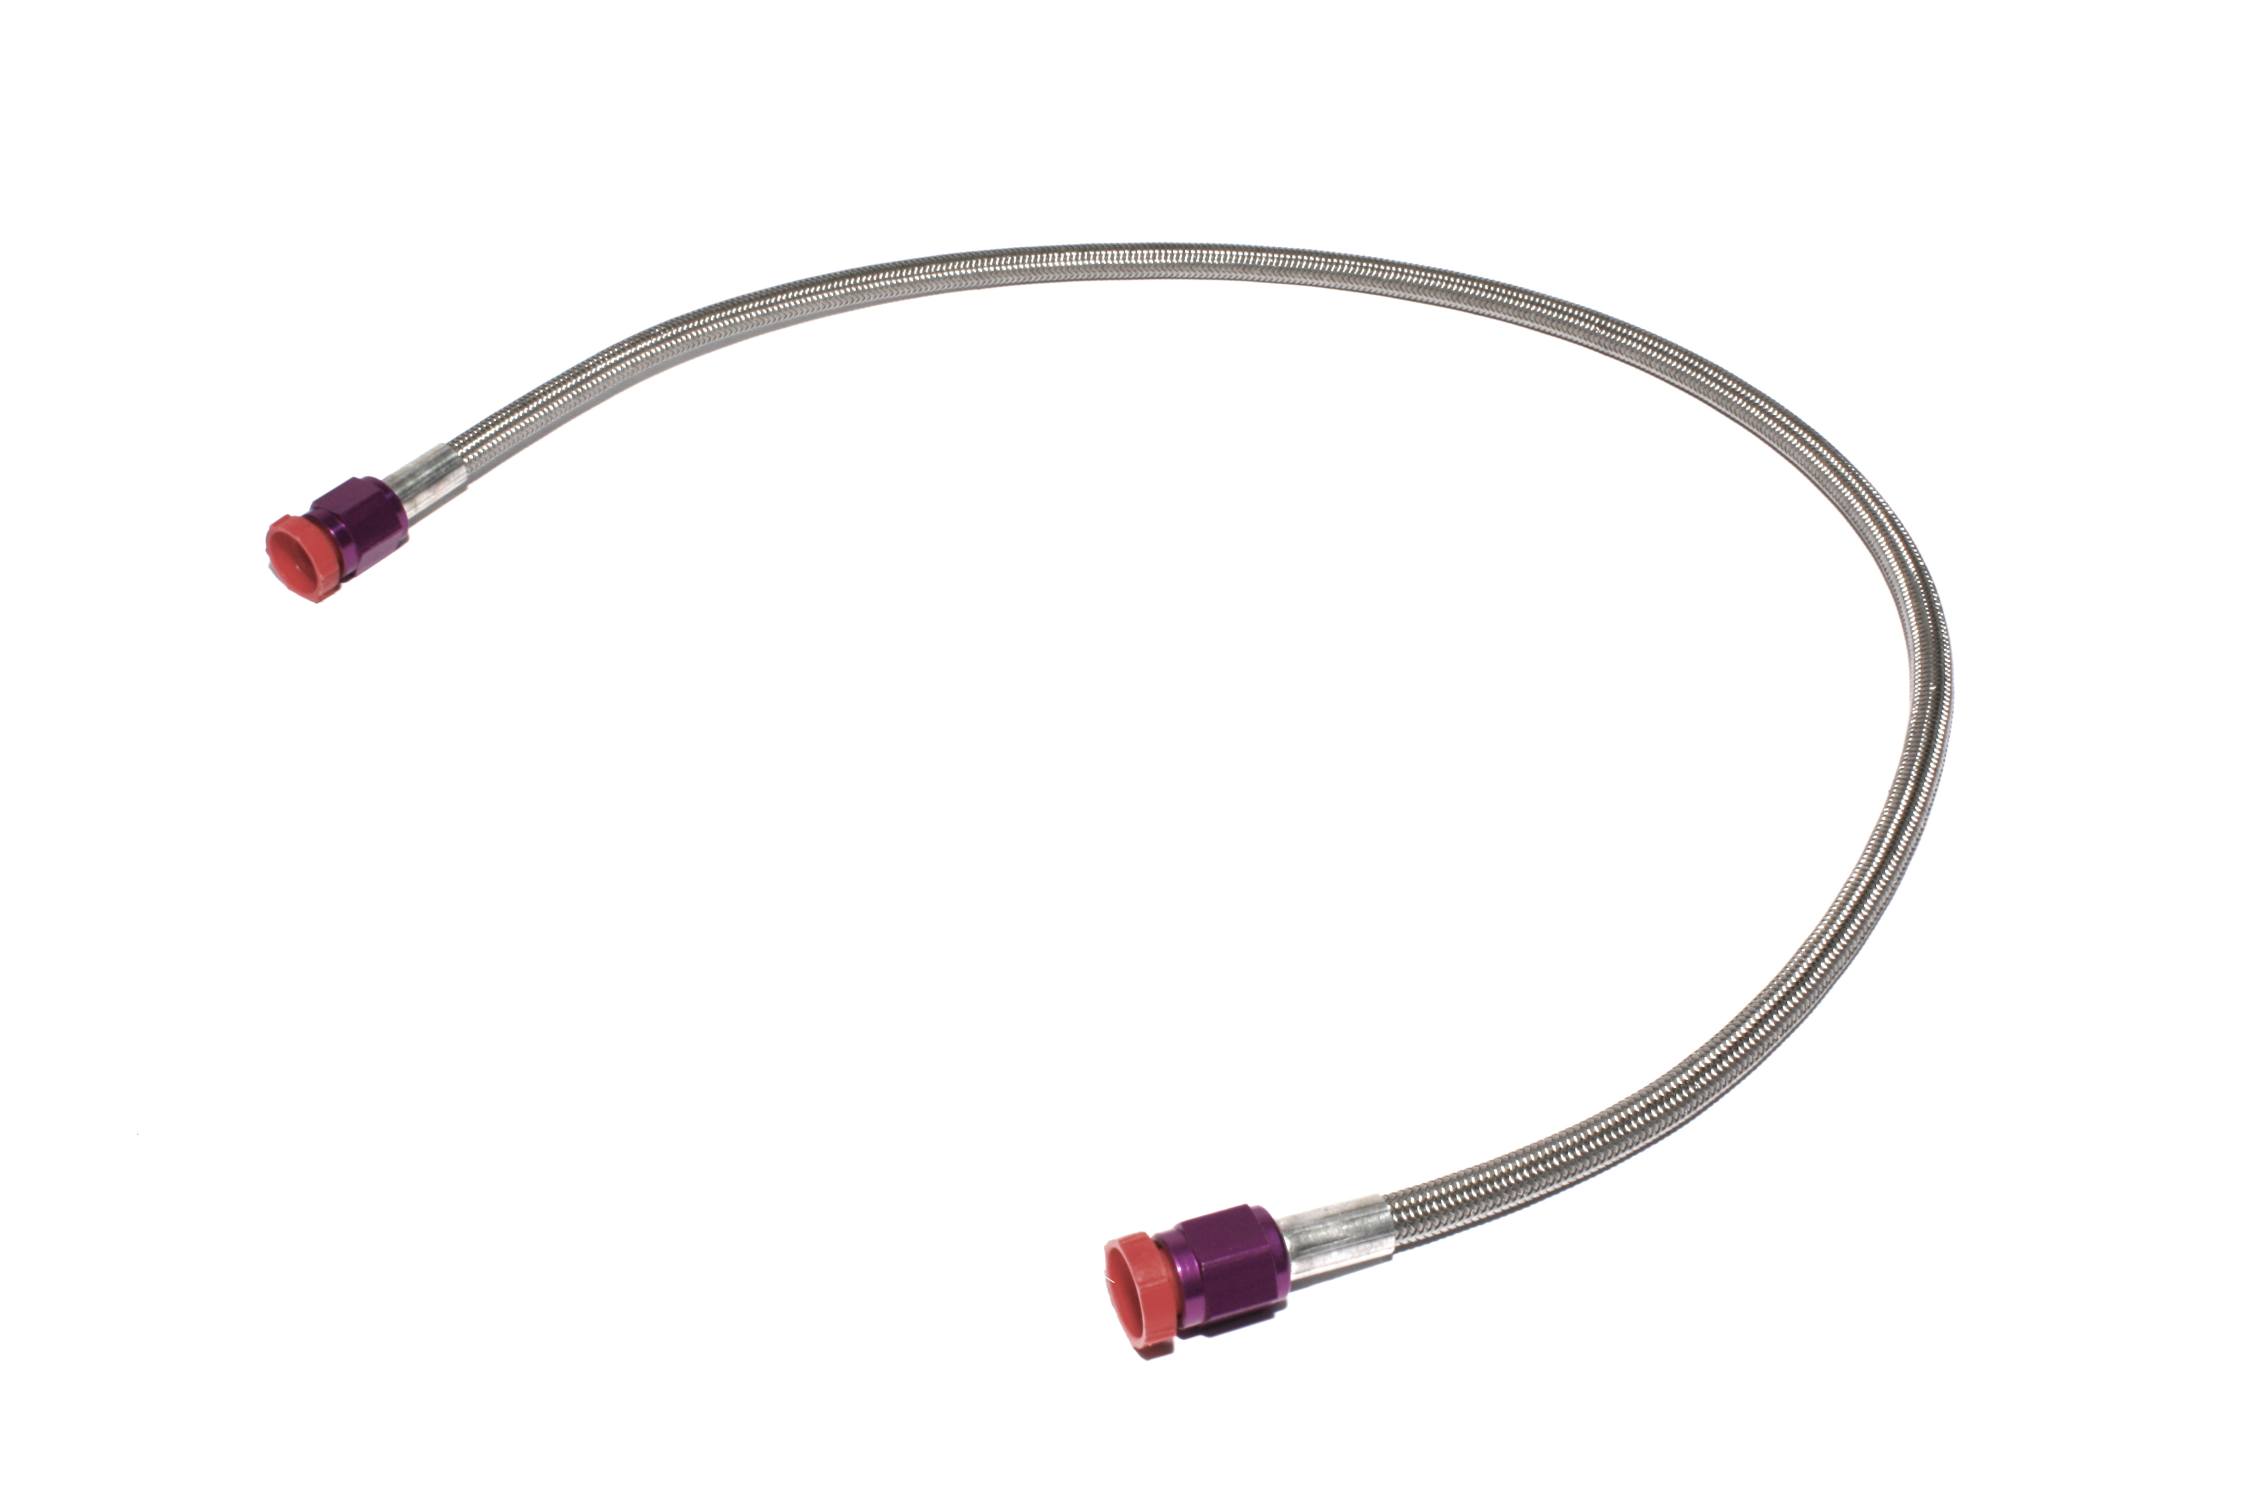 ZEX 1' (ft) Long -4AN Braided Hose with Purple Ends, 4AN 1', Corvette, Camaro and others